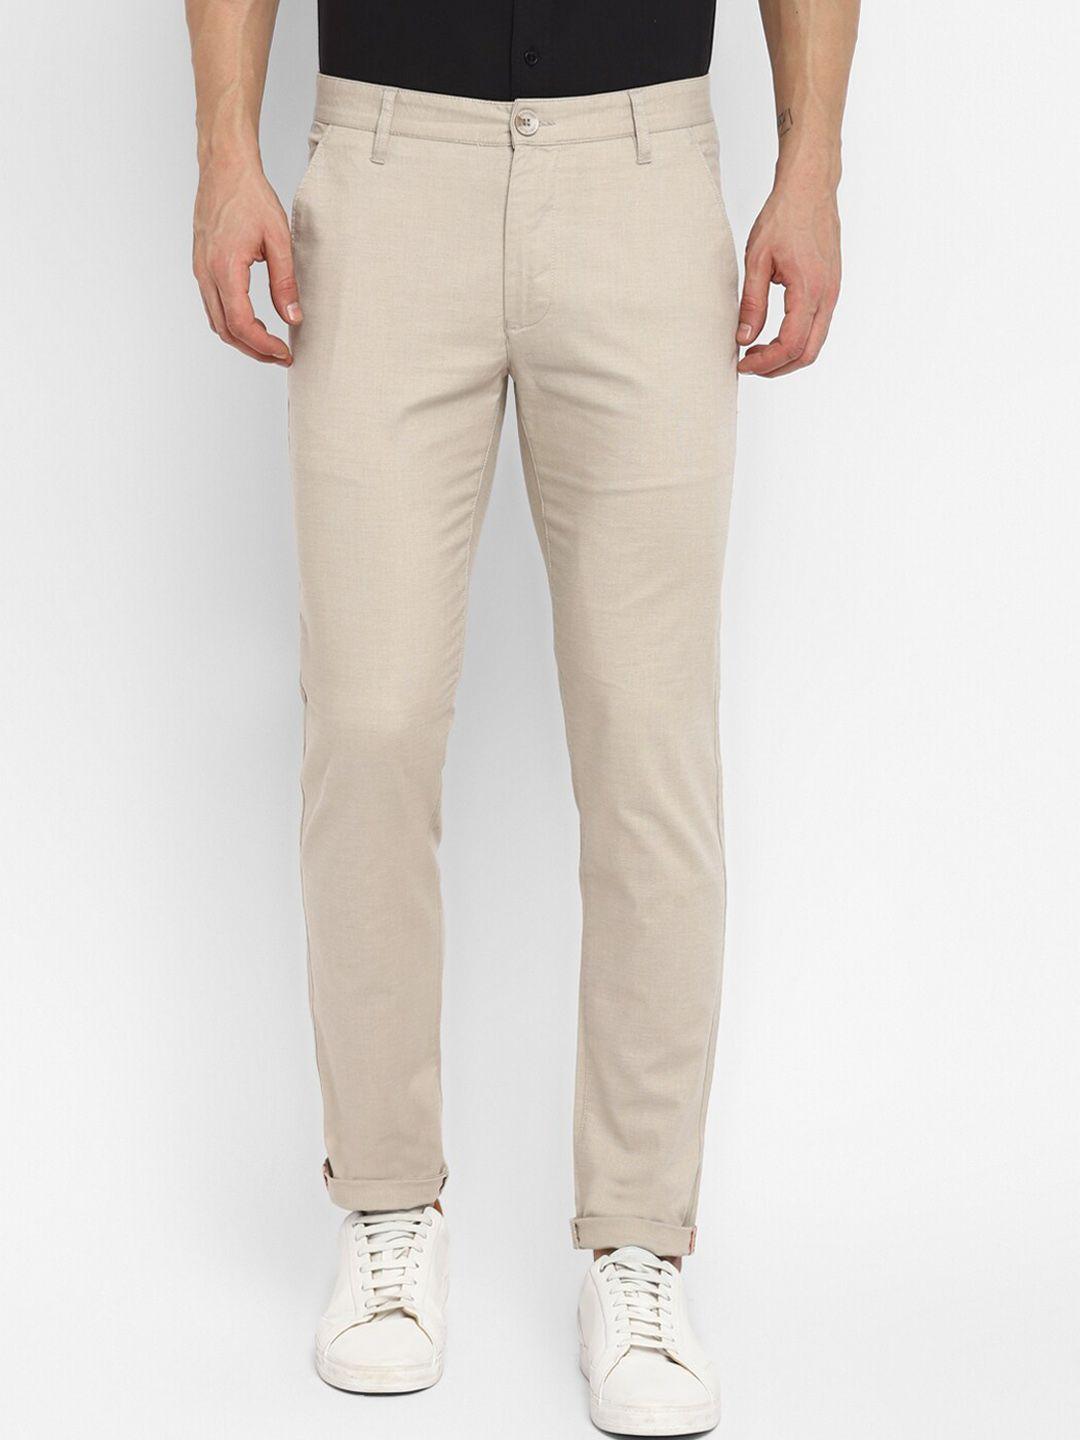 red chief men cream-coloured trousers